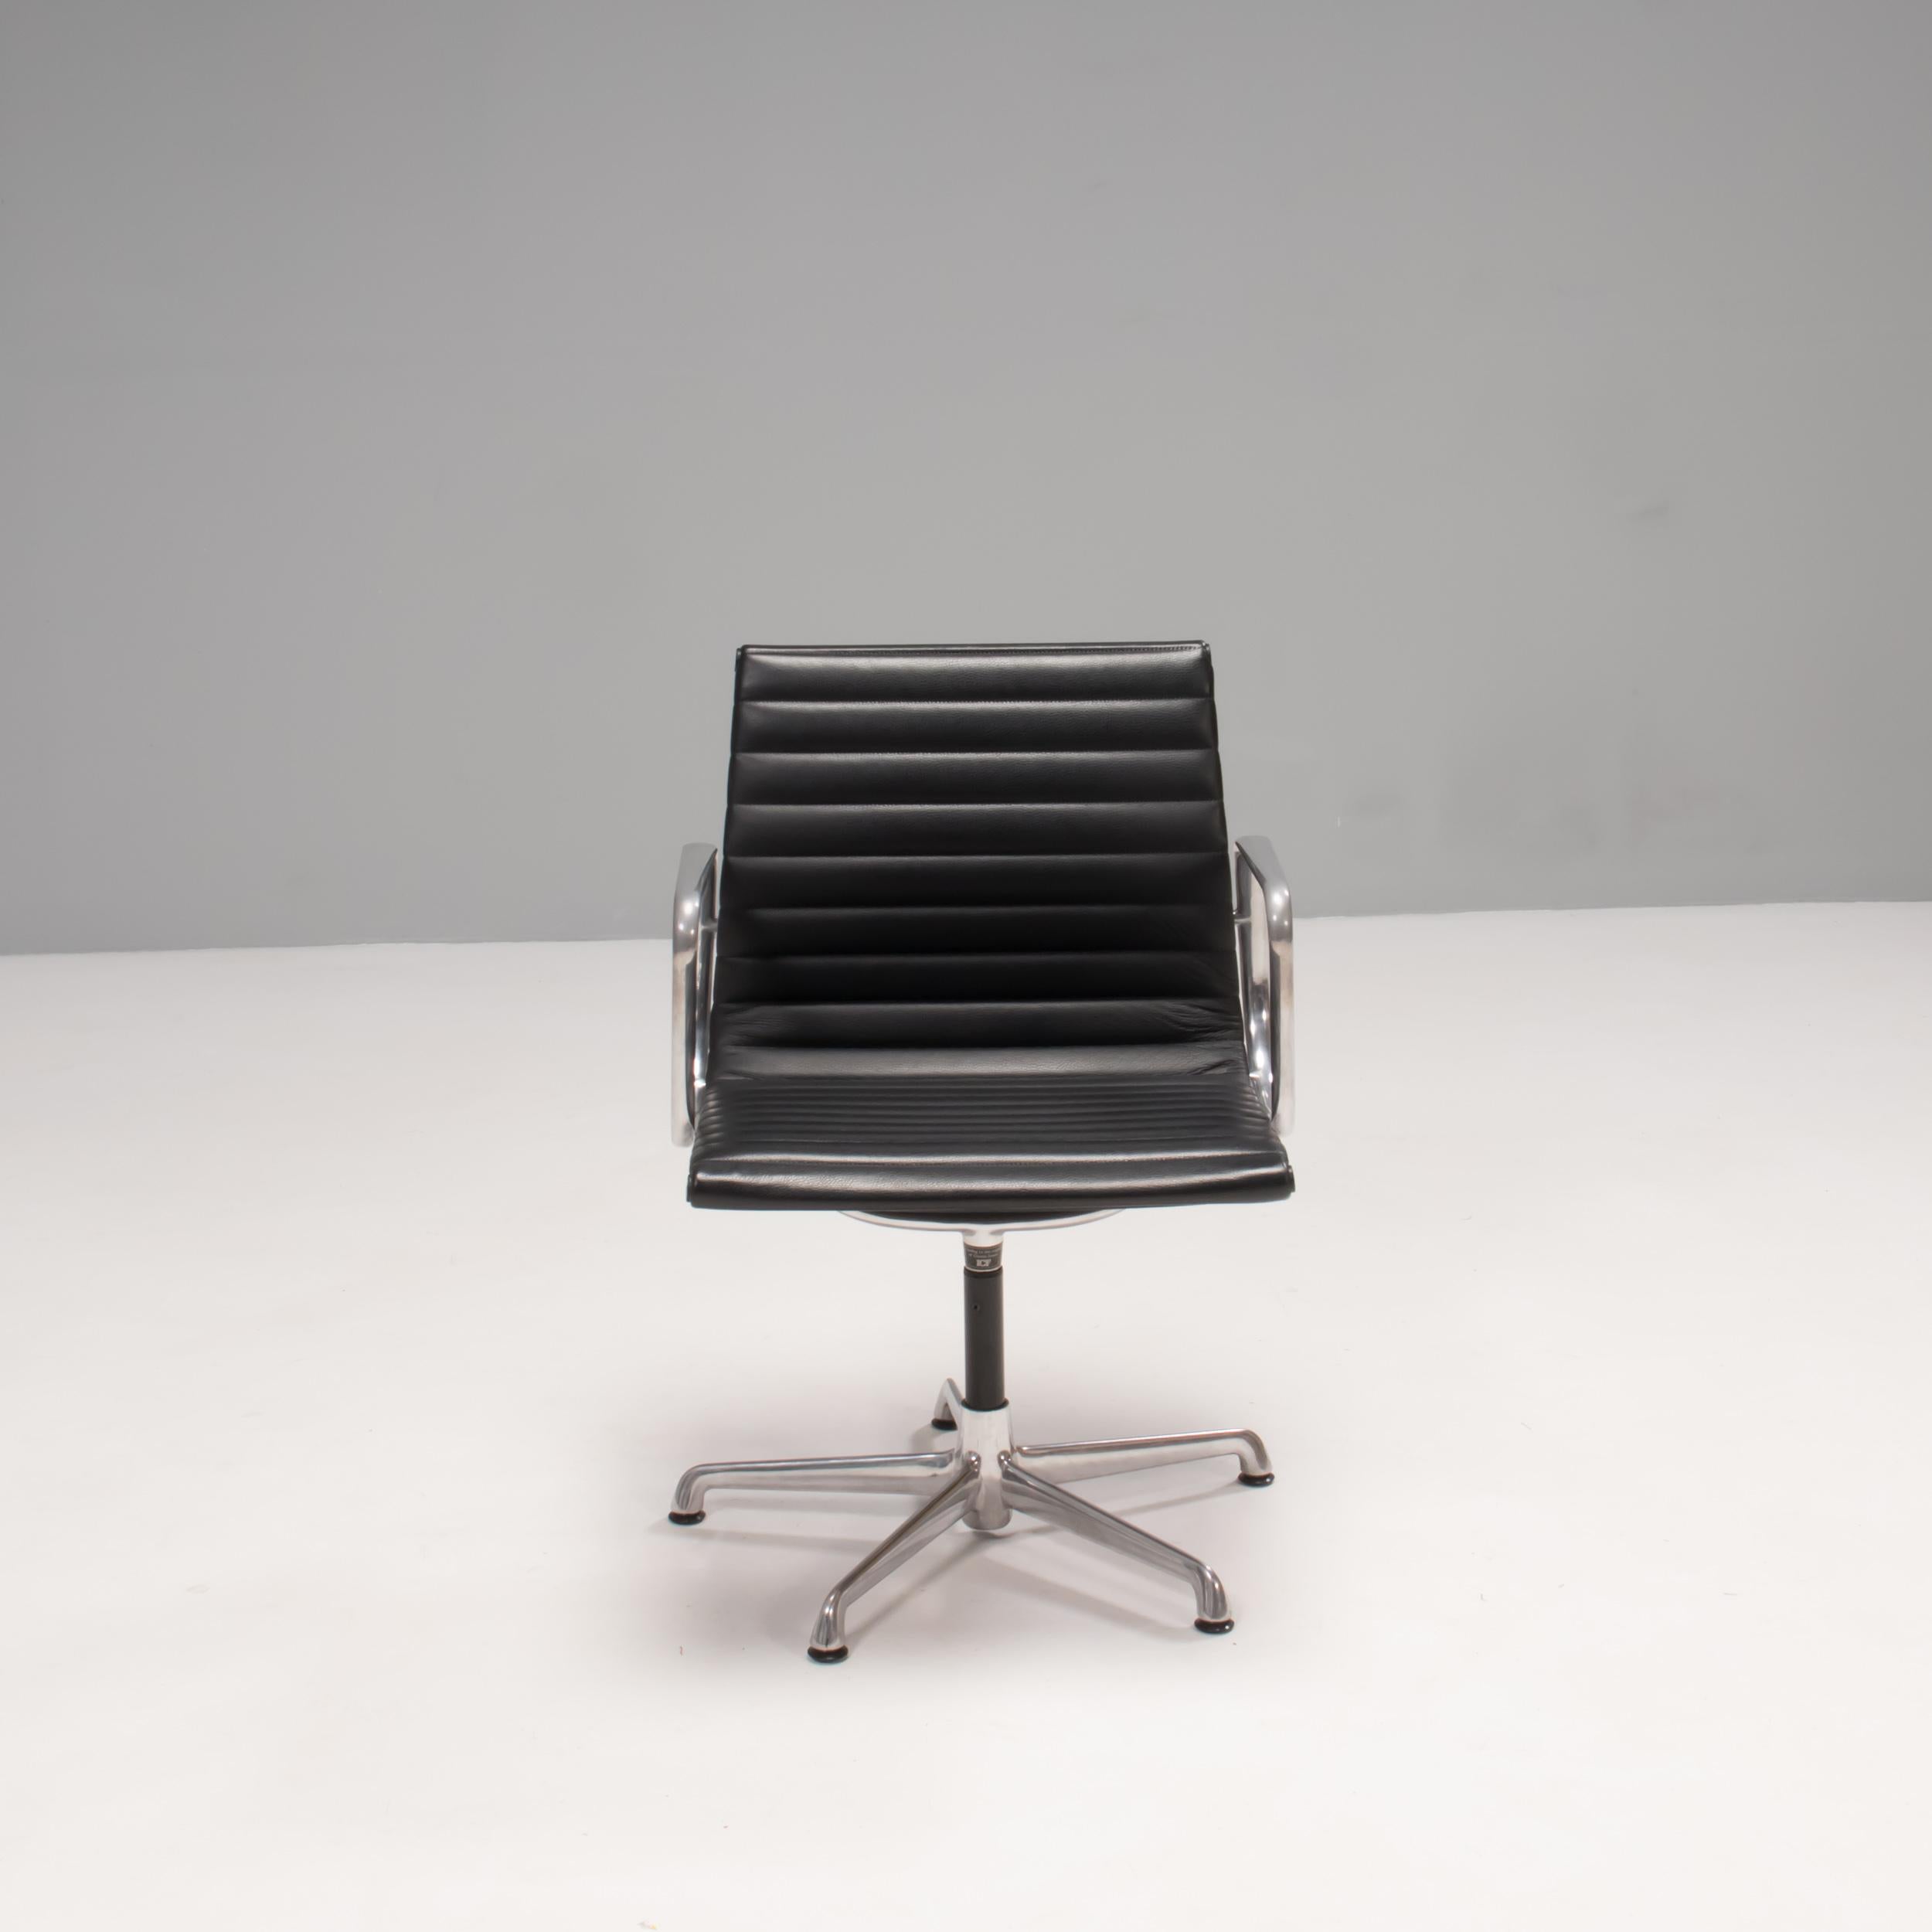 Originally designed by Charles and Ray Eames in 1958, the EA 108 chair has since become a design icon.

ICF was one of four original manufacturers granted a license by Herman Miller to reproduce Eames designed chairs, and they continued